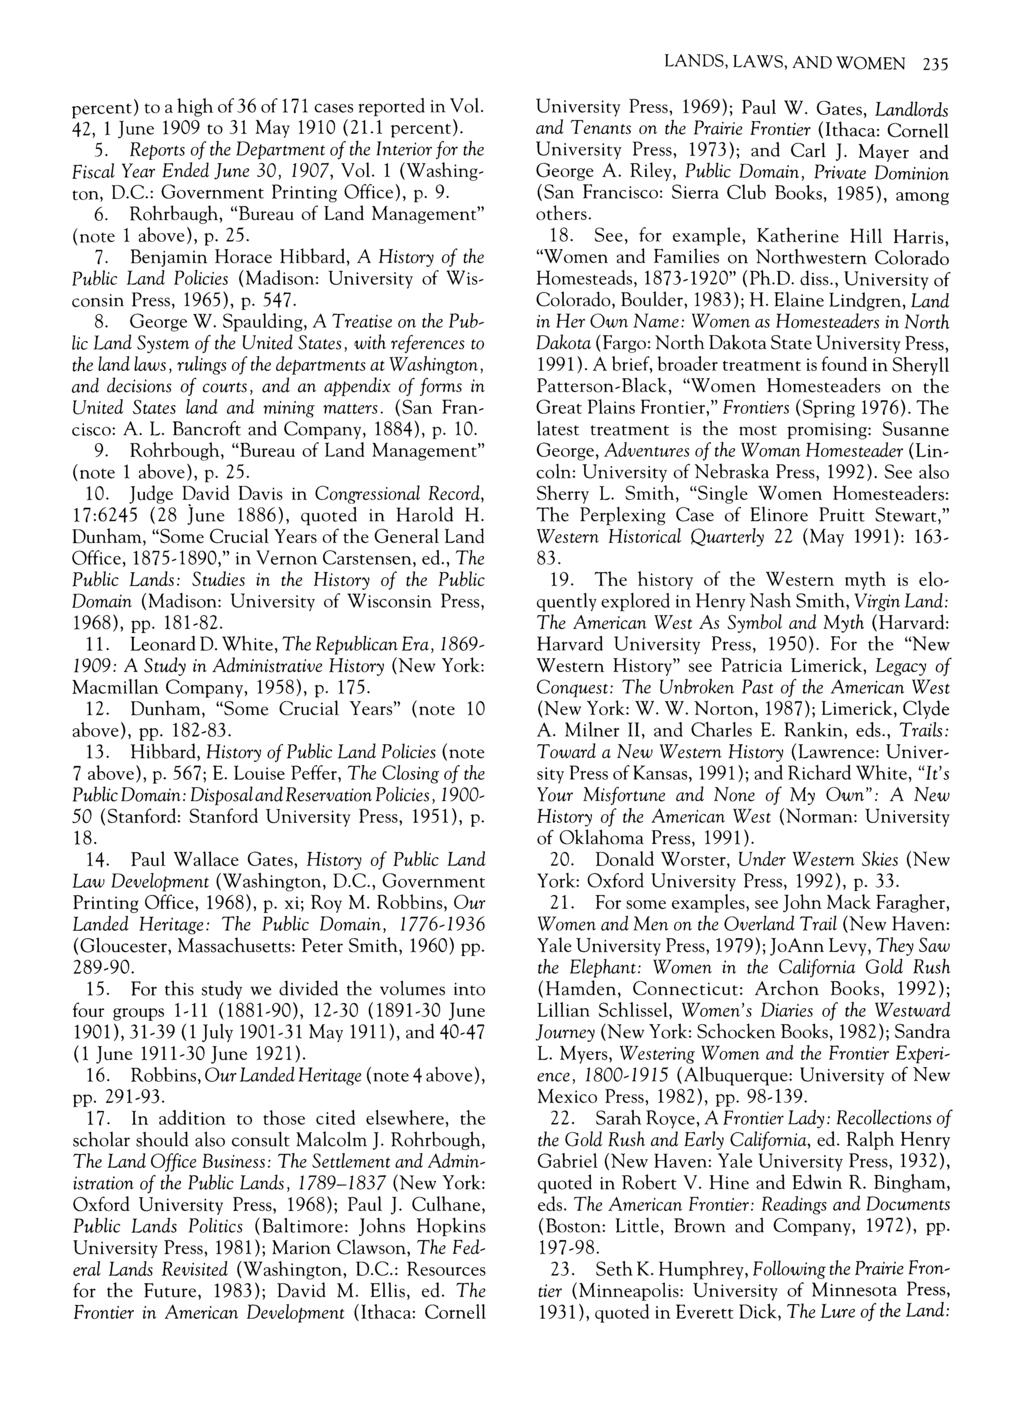 LANDS, LAWS, AND WOMEN 235 percent) to a high of 36 of 171 cases reported in Vol. 42, 1 June 1909 to 31 May 1910 (21.1 percent). 5.